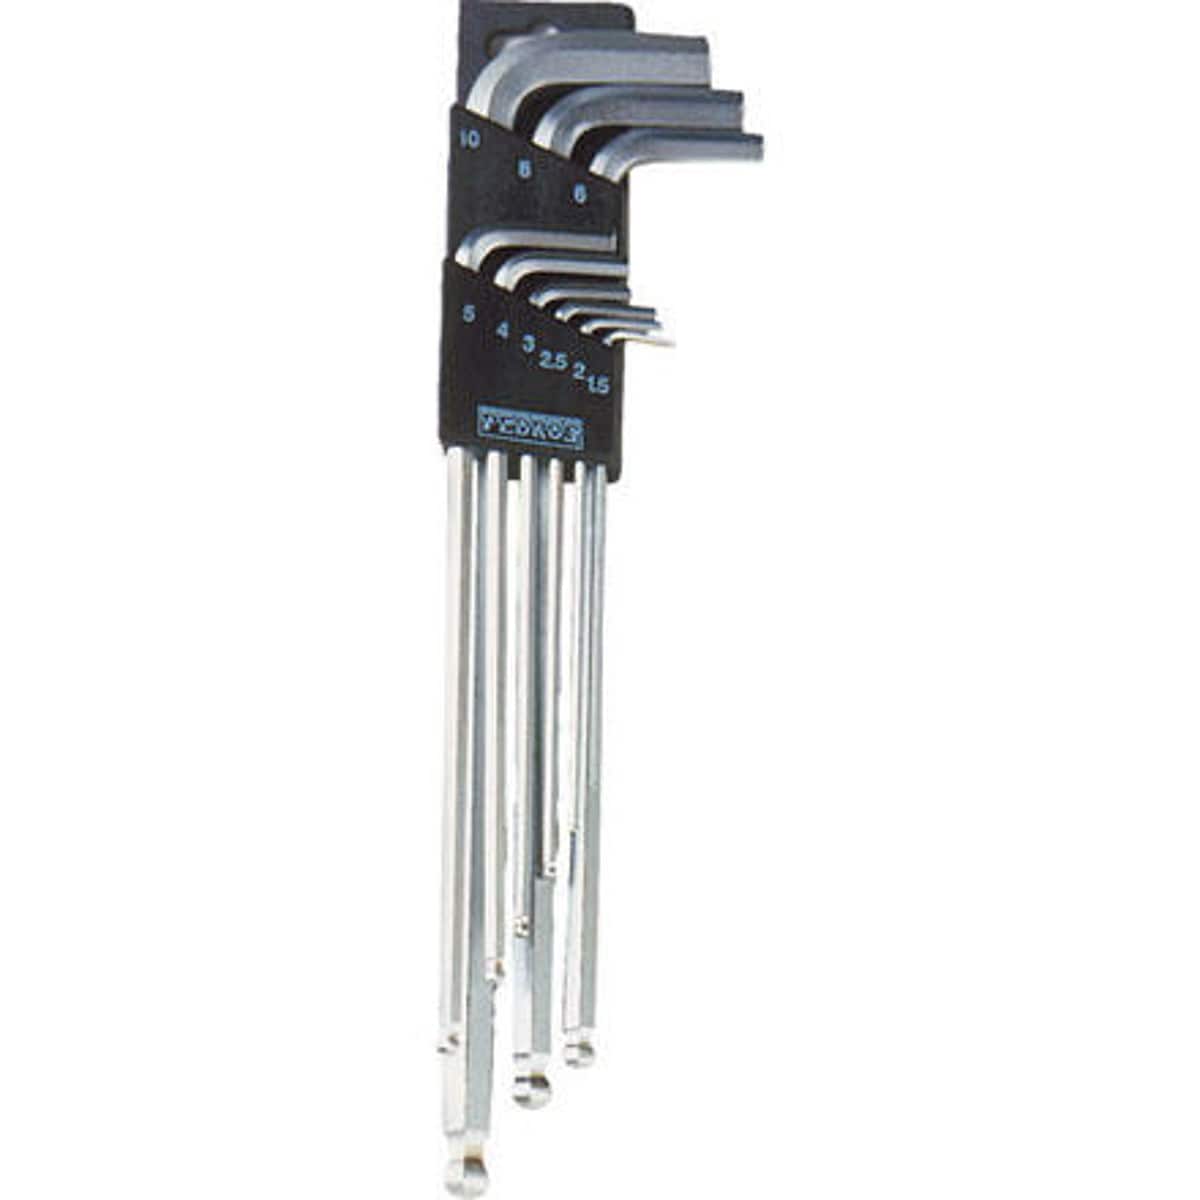 Pedro's L Hex Wrench Set - 9 Piece